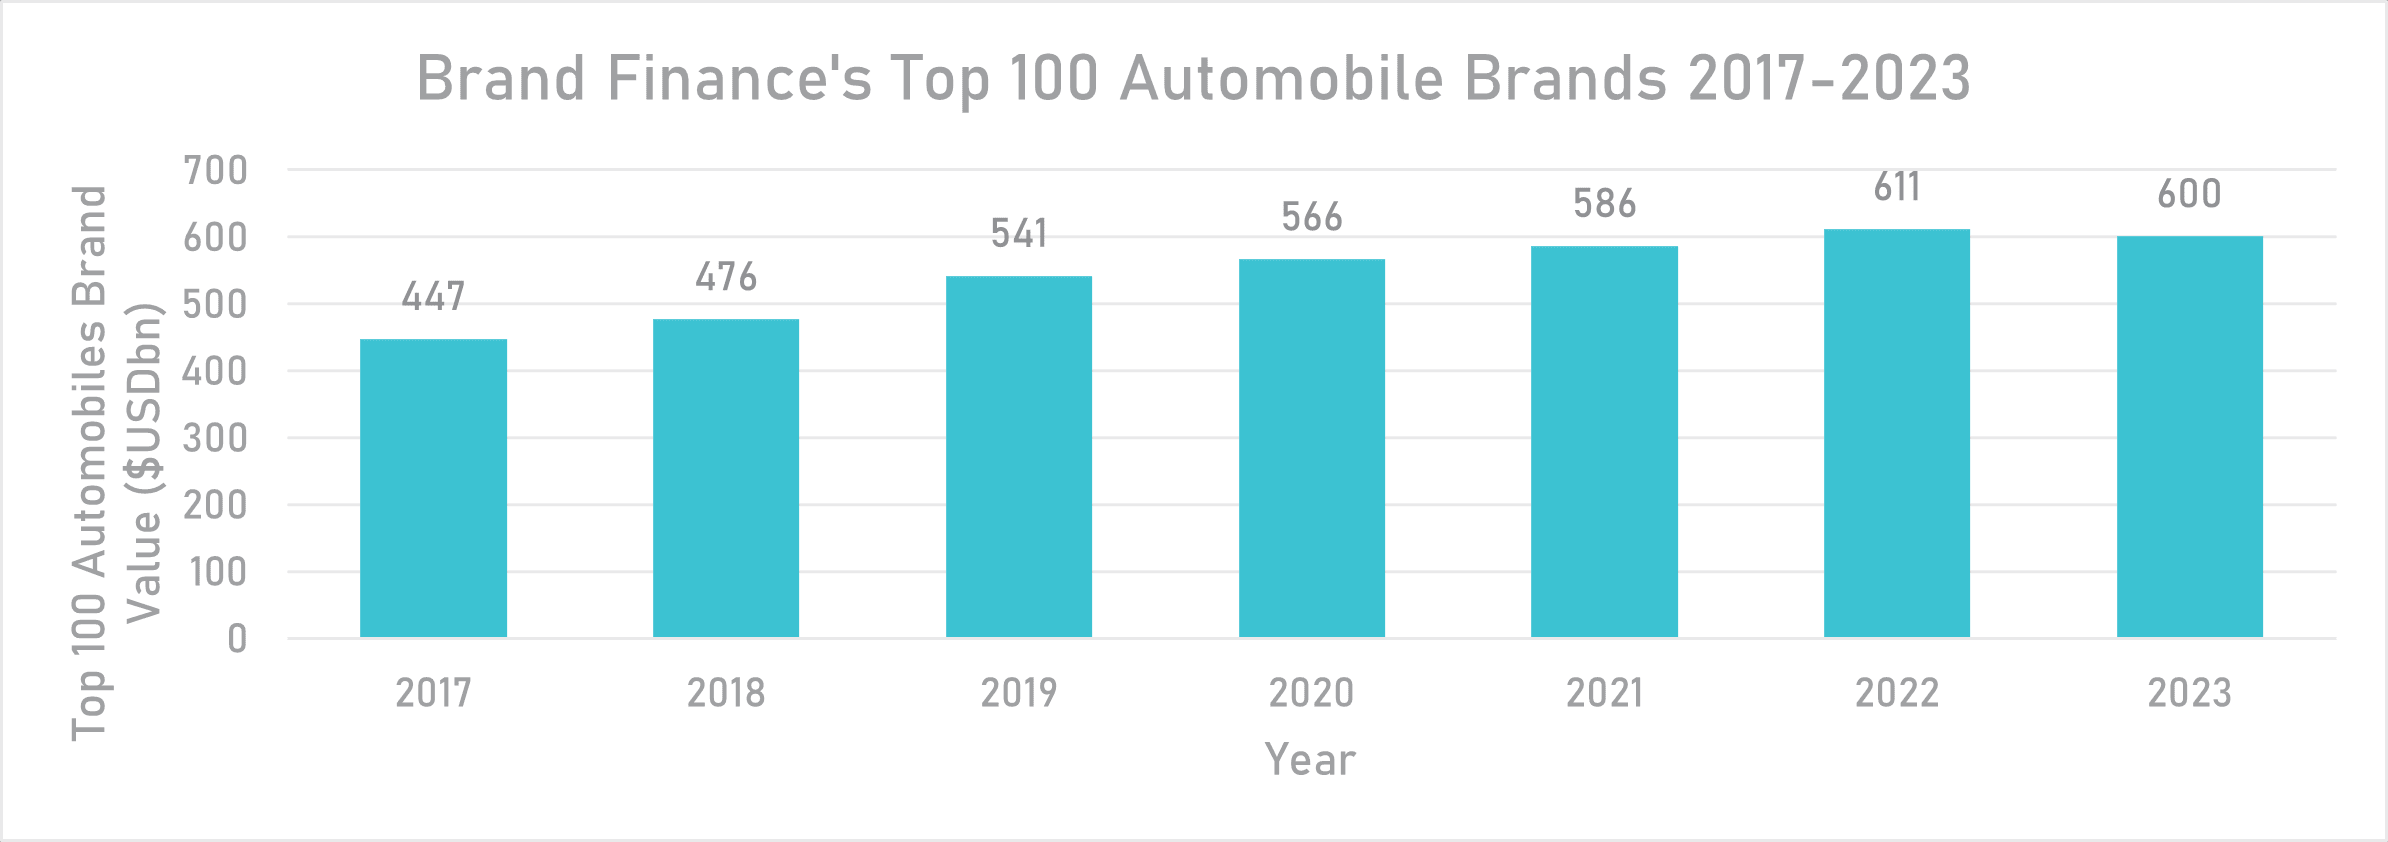 2023 Automotive Industry Trends An Industry Inflection Point? Brand Finance